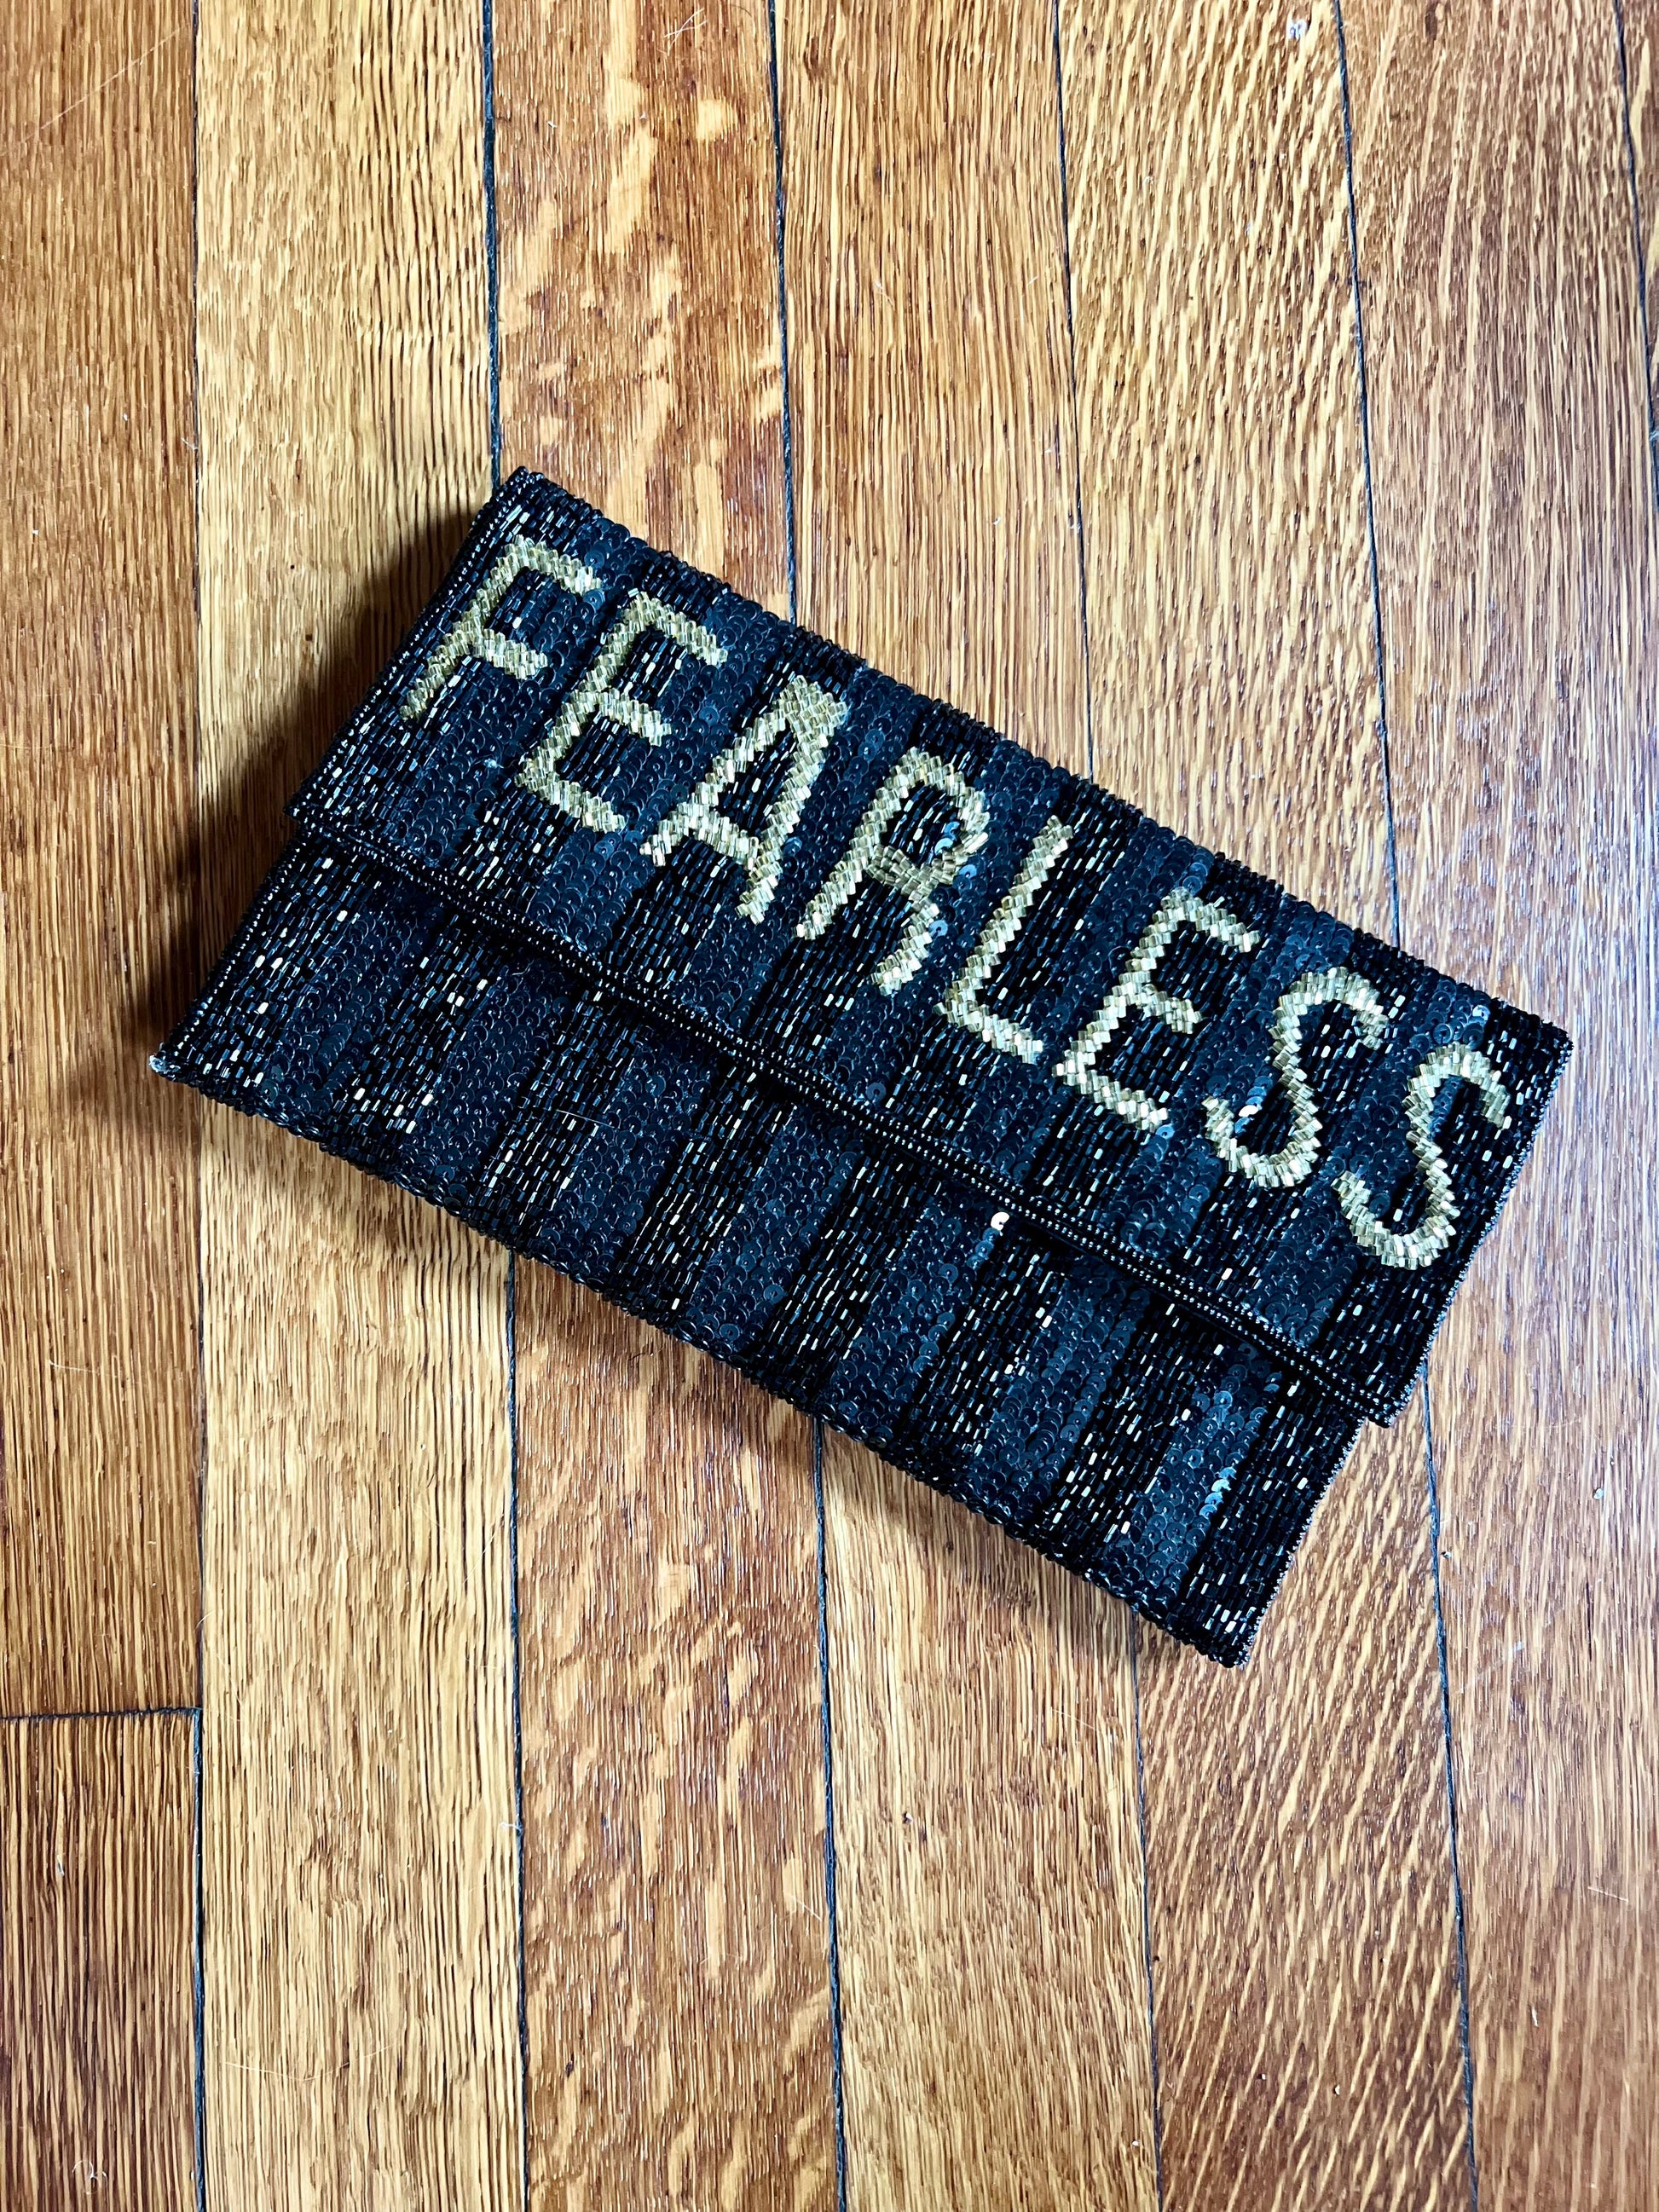 Statement Beaded Envelope Clutch - Fearless Bags Indiblossom   